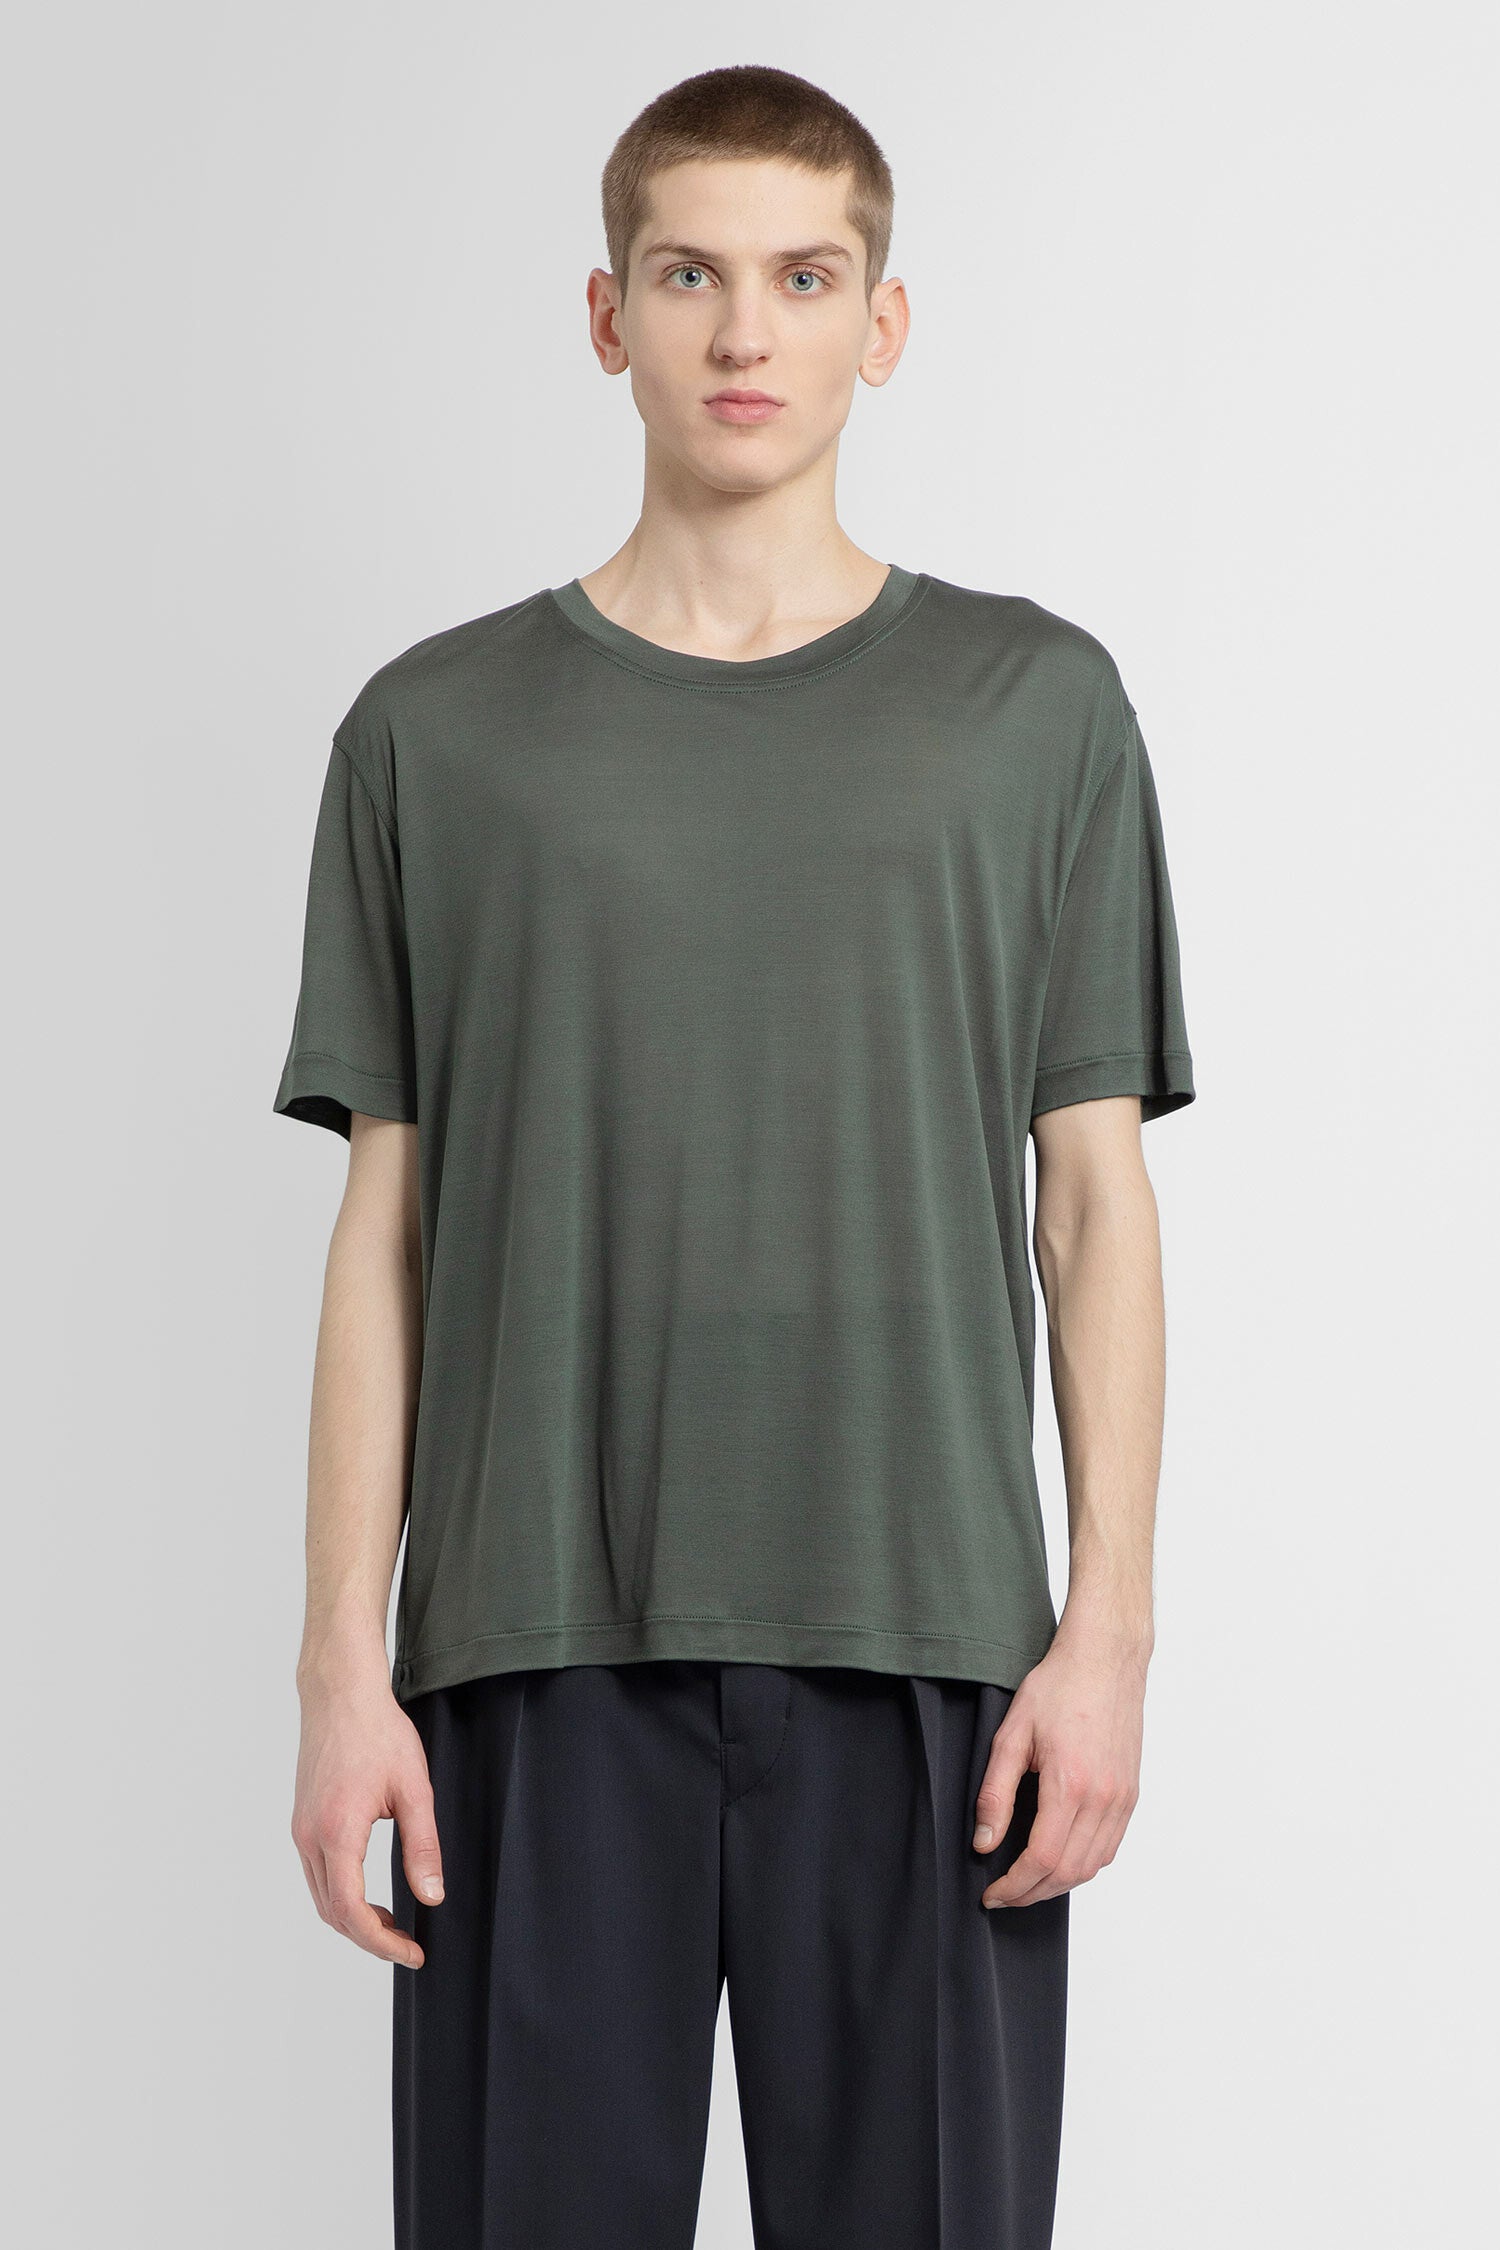 LEMAIRE MAN GREY T-SHIRTS